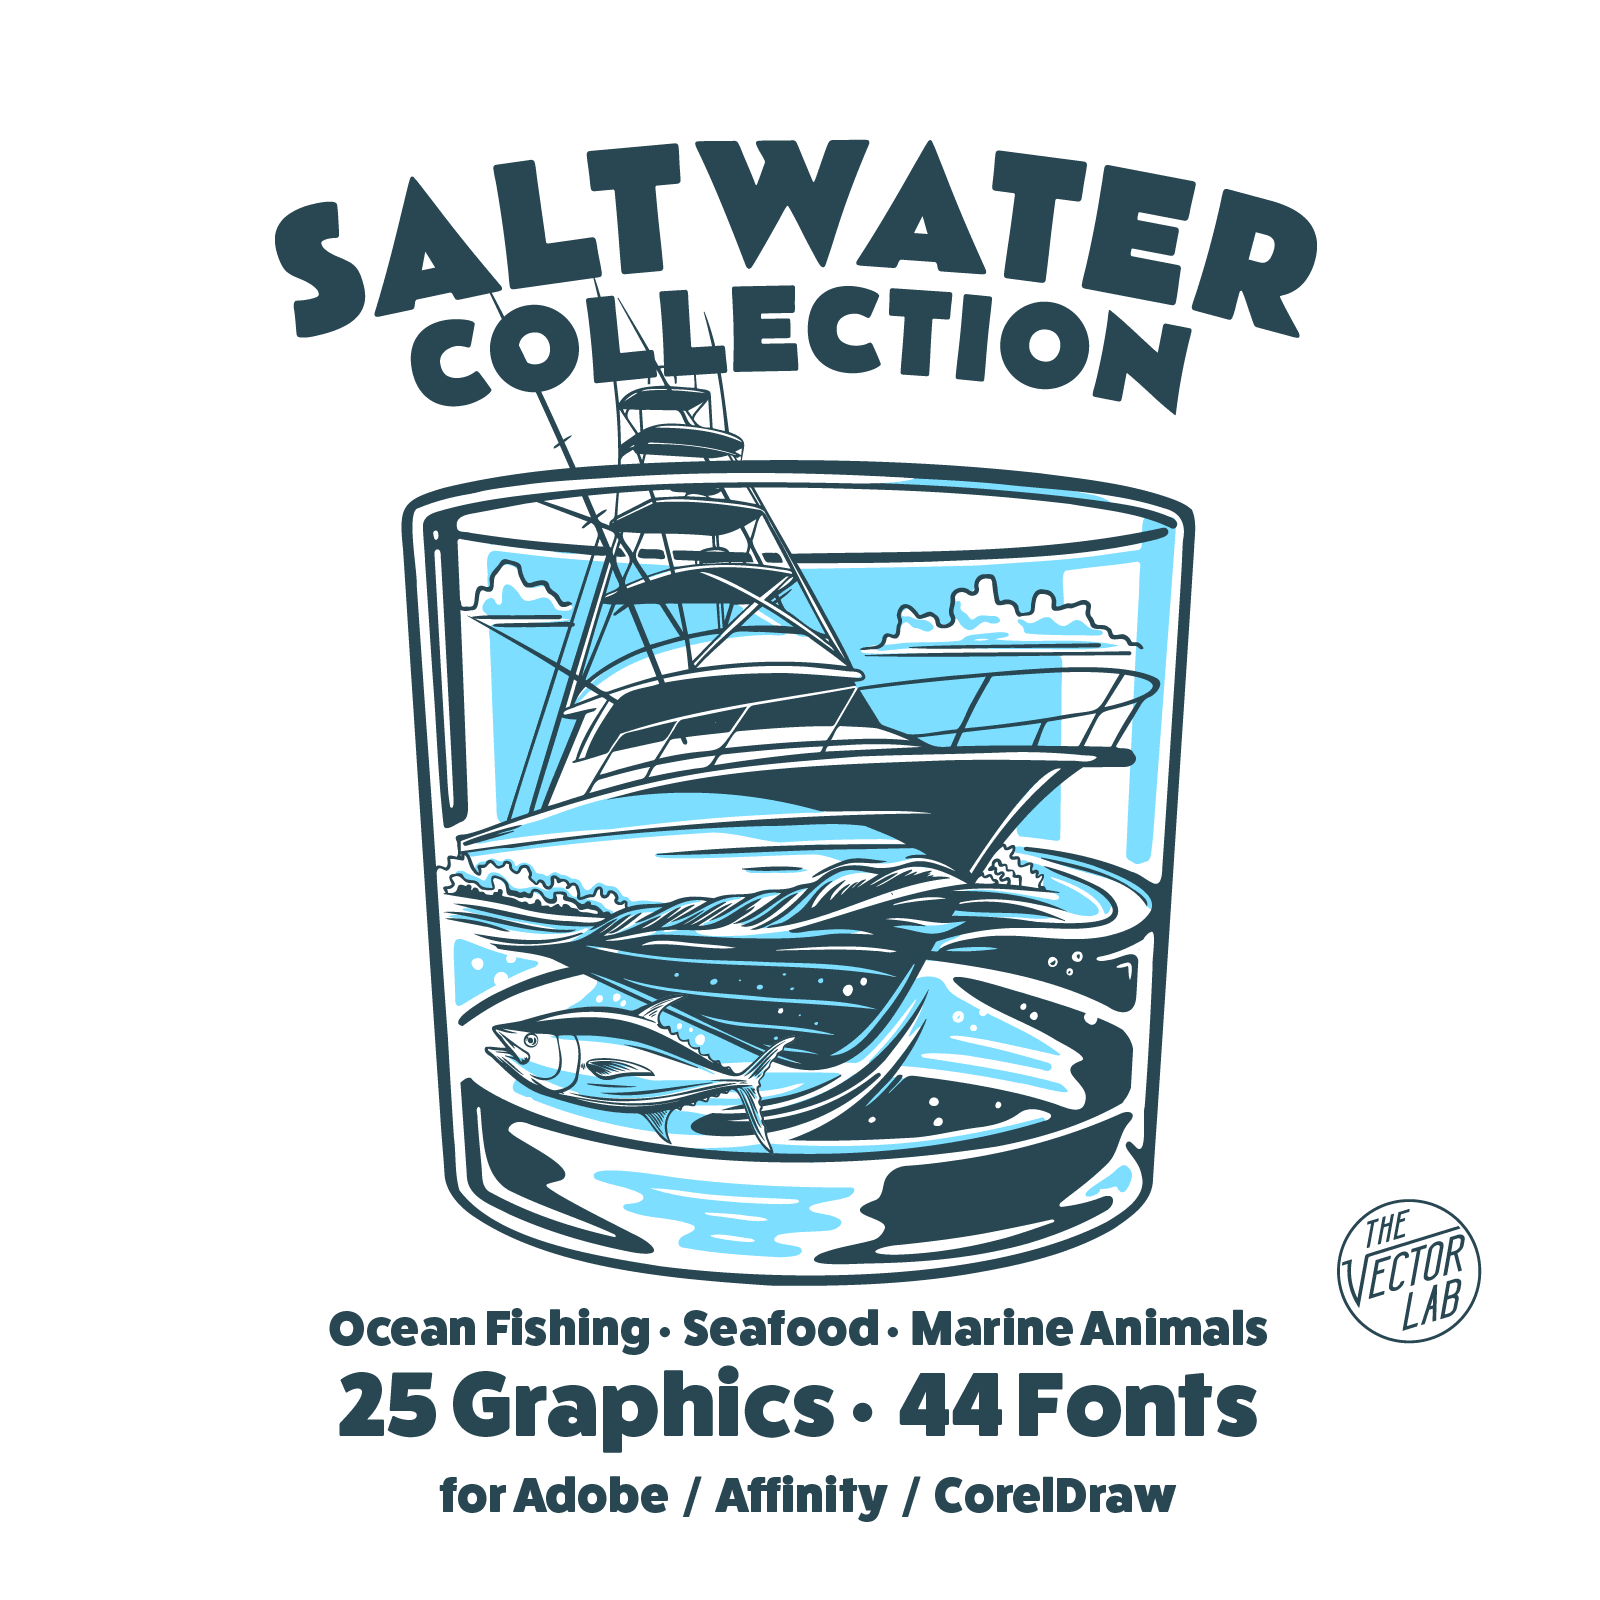 Saltwater - TheVectorLab